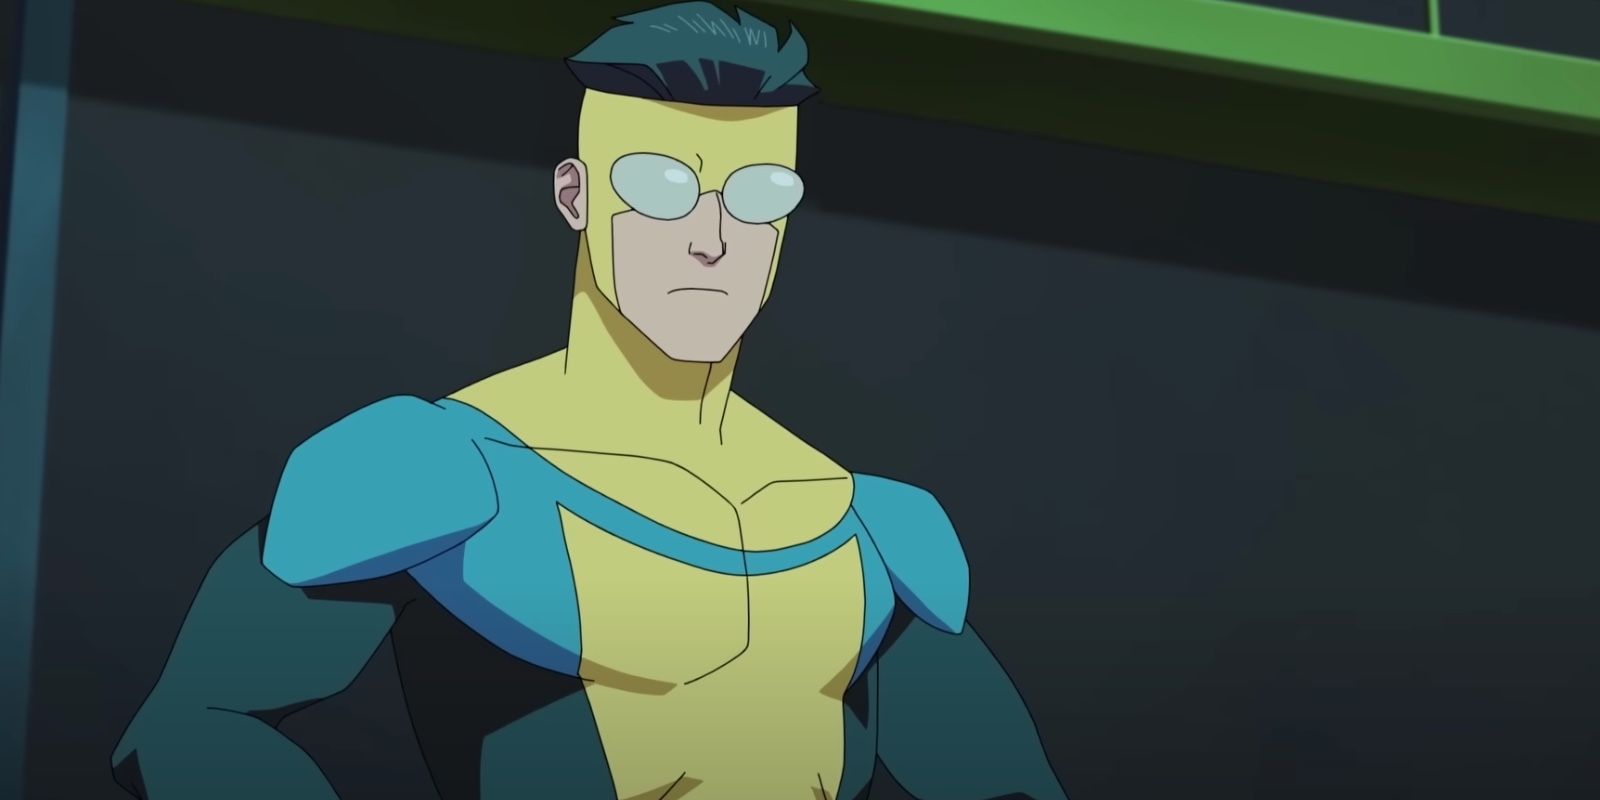 Invincible Season 2 Release Date Schedule of Episodes Officially